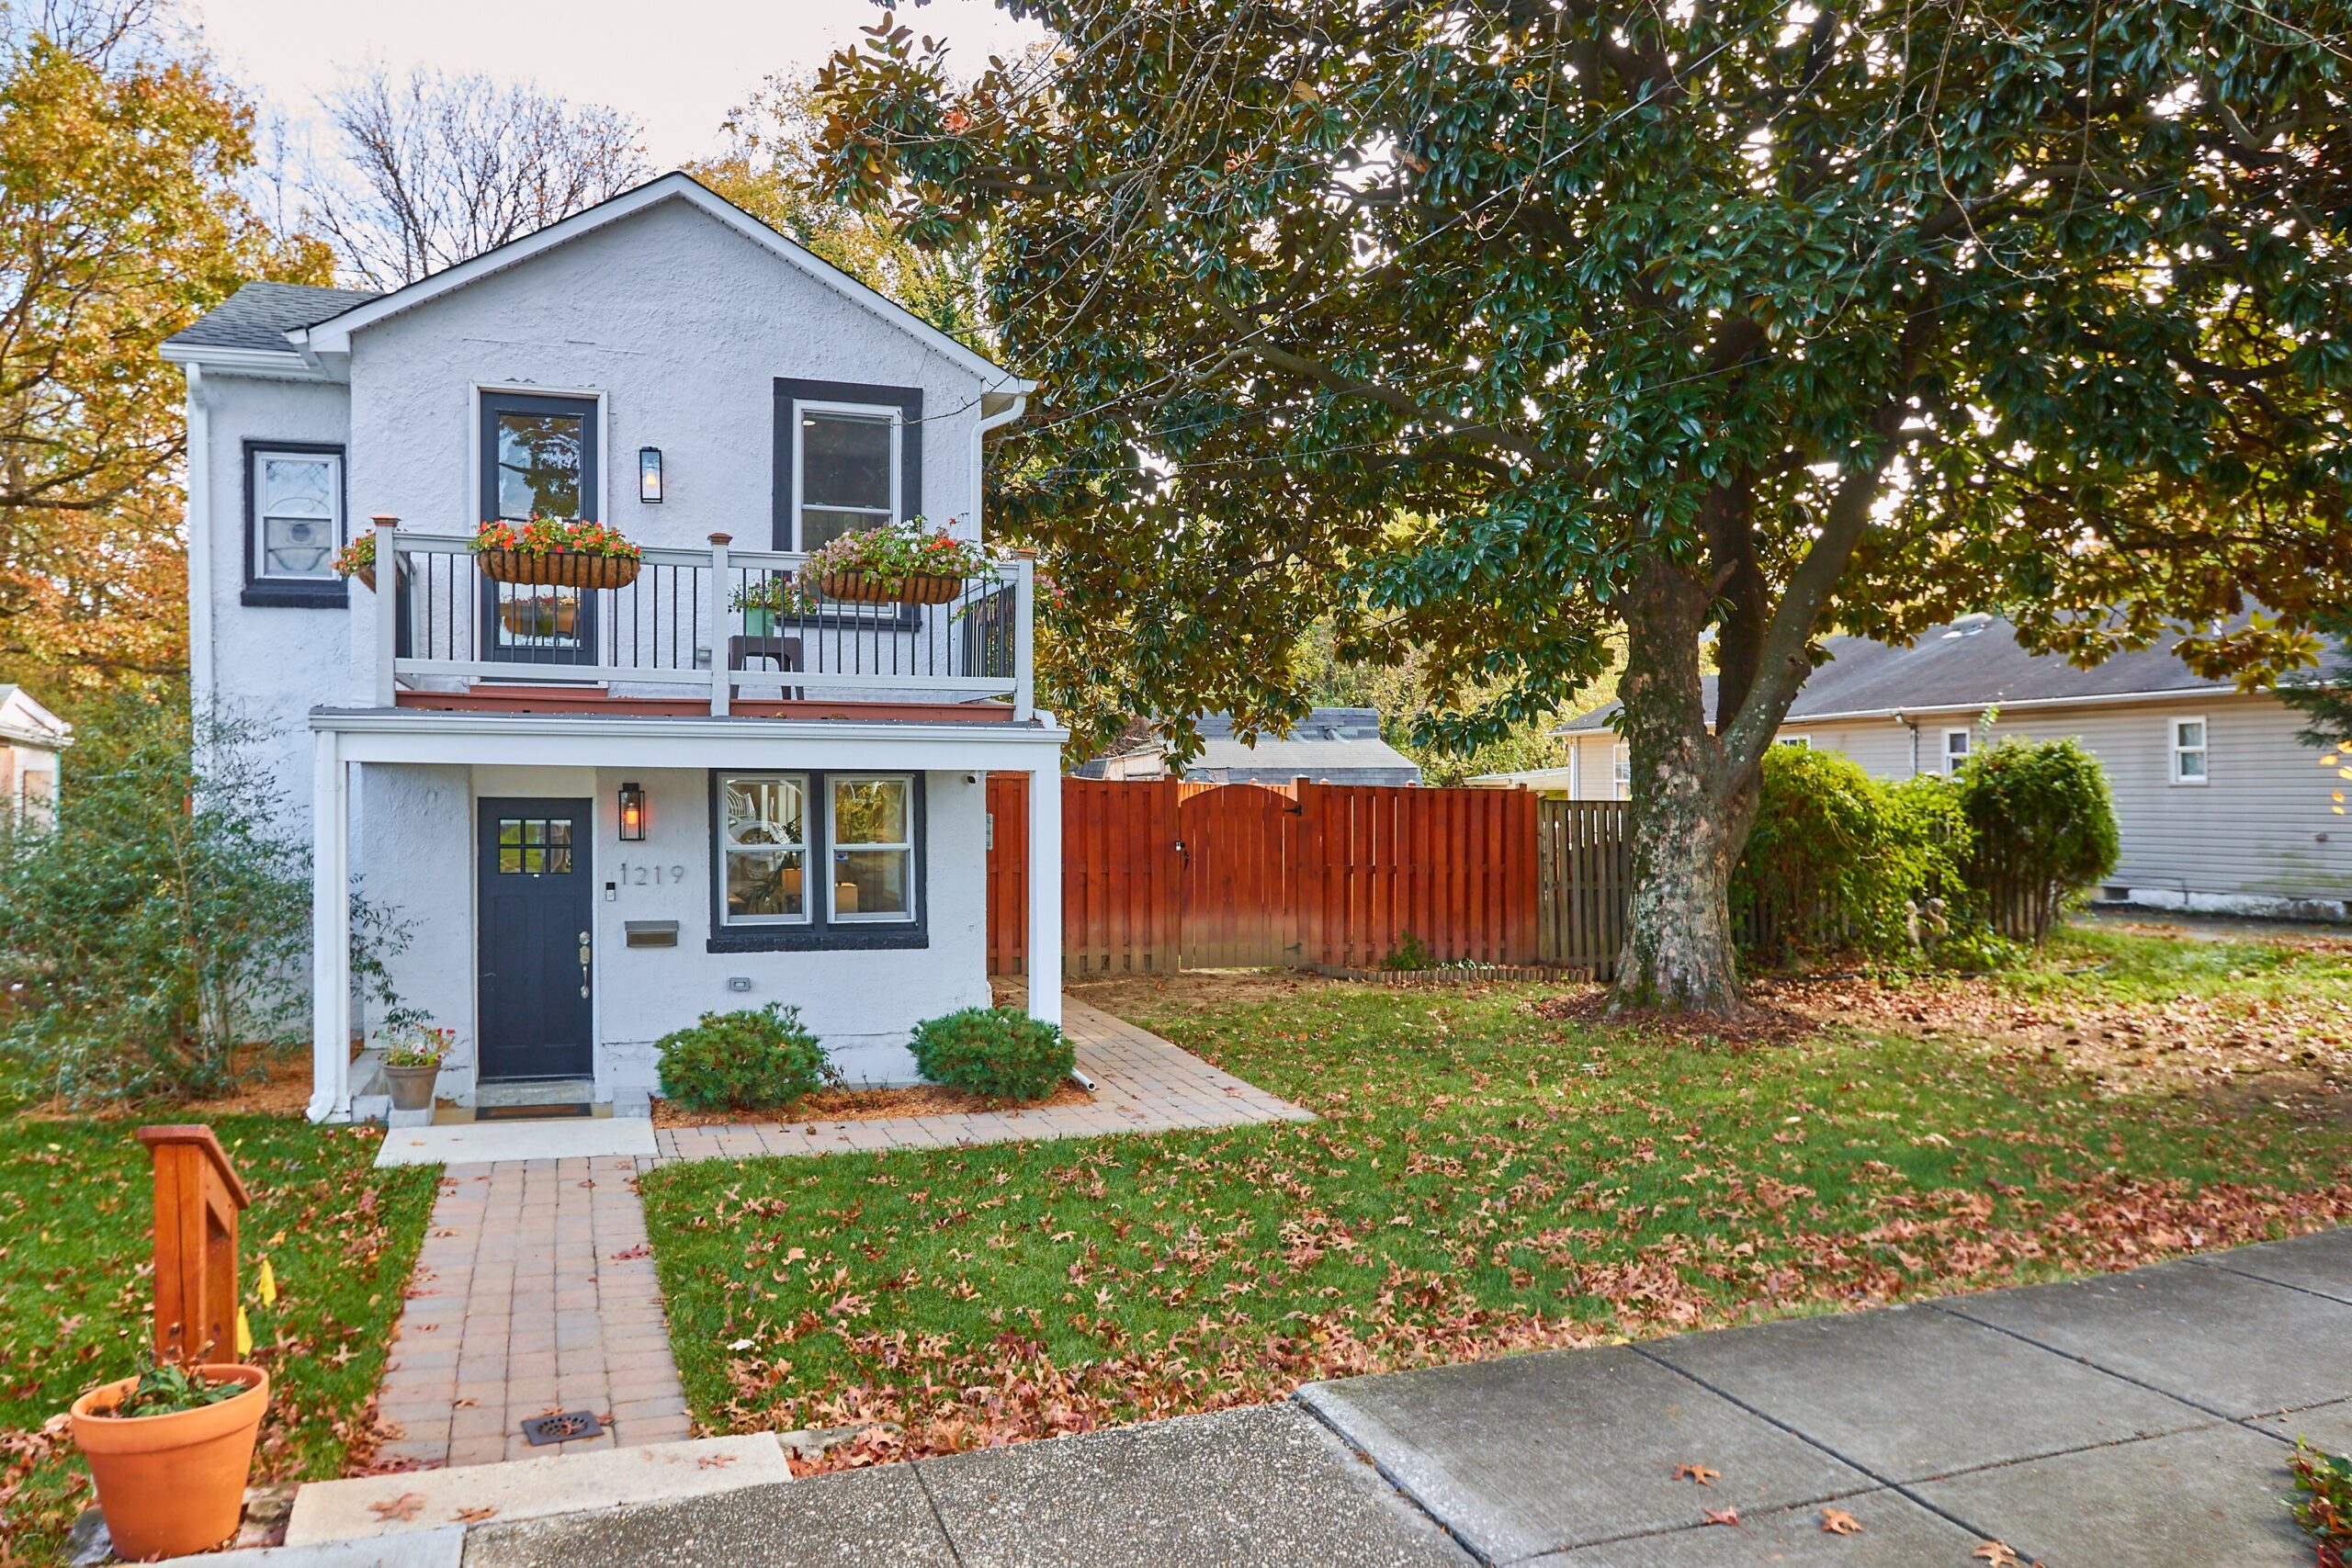 Professional exterior photo of 1219 50th St NE in Washington, DC - showing the front view from an angle at the curb and you see a white detached home with balcony and fully fenced backyard